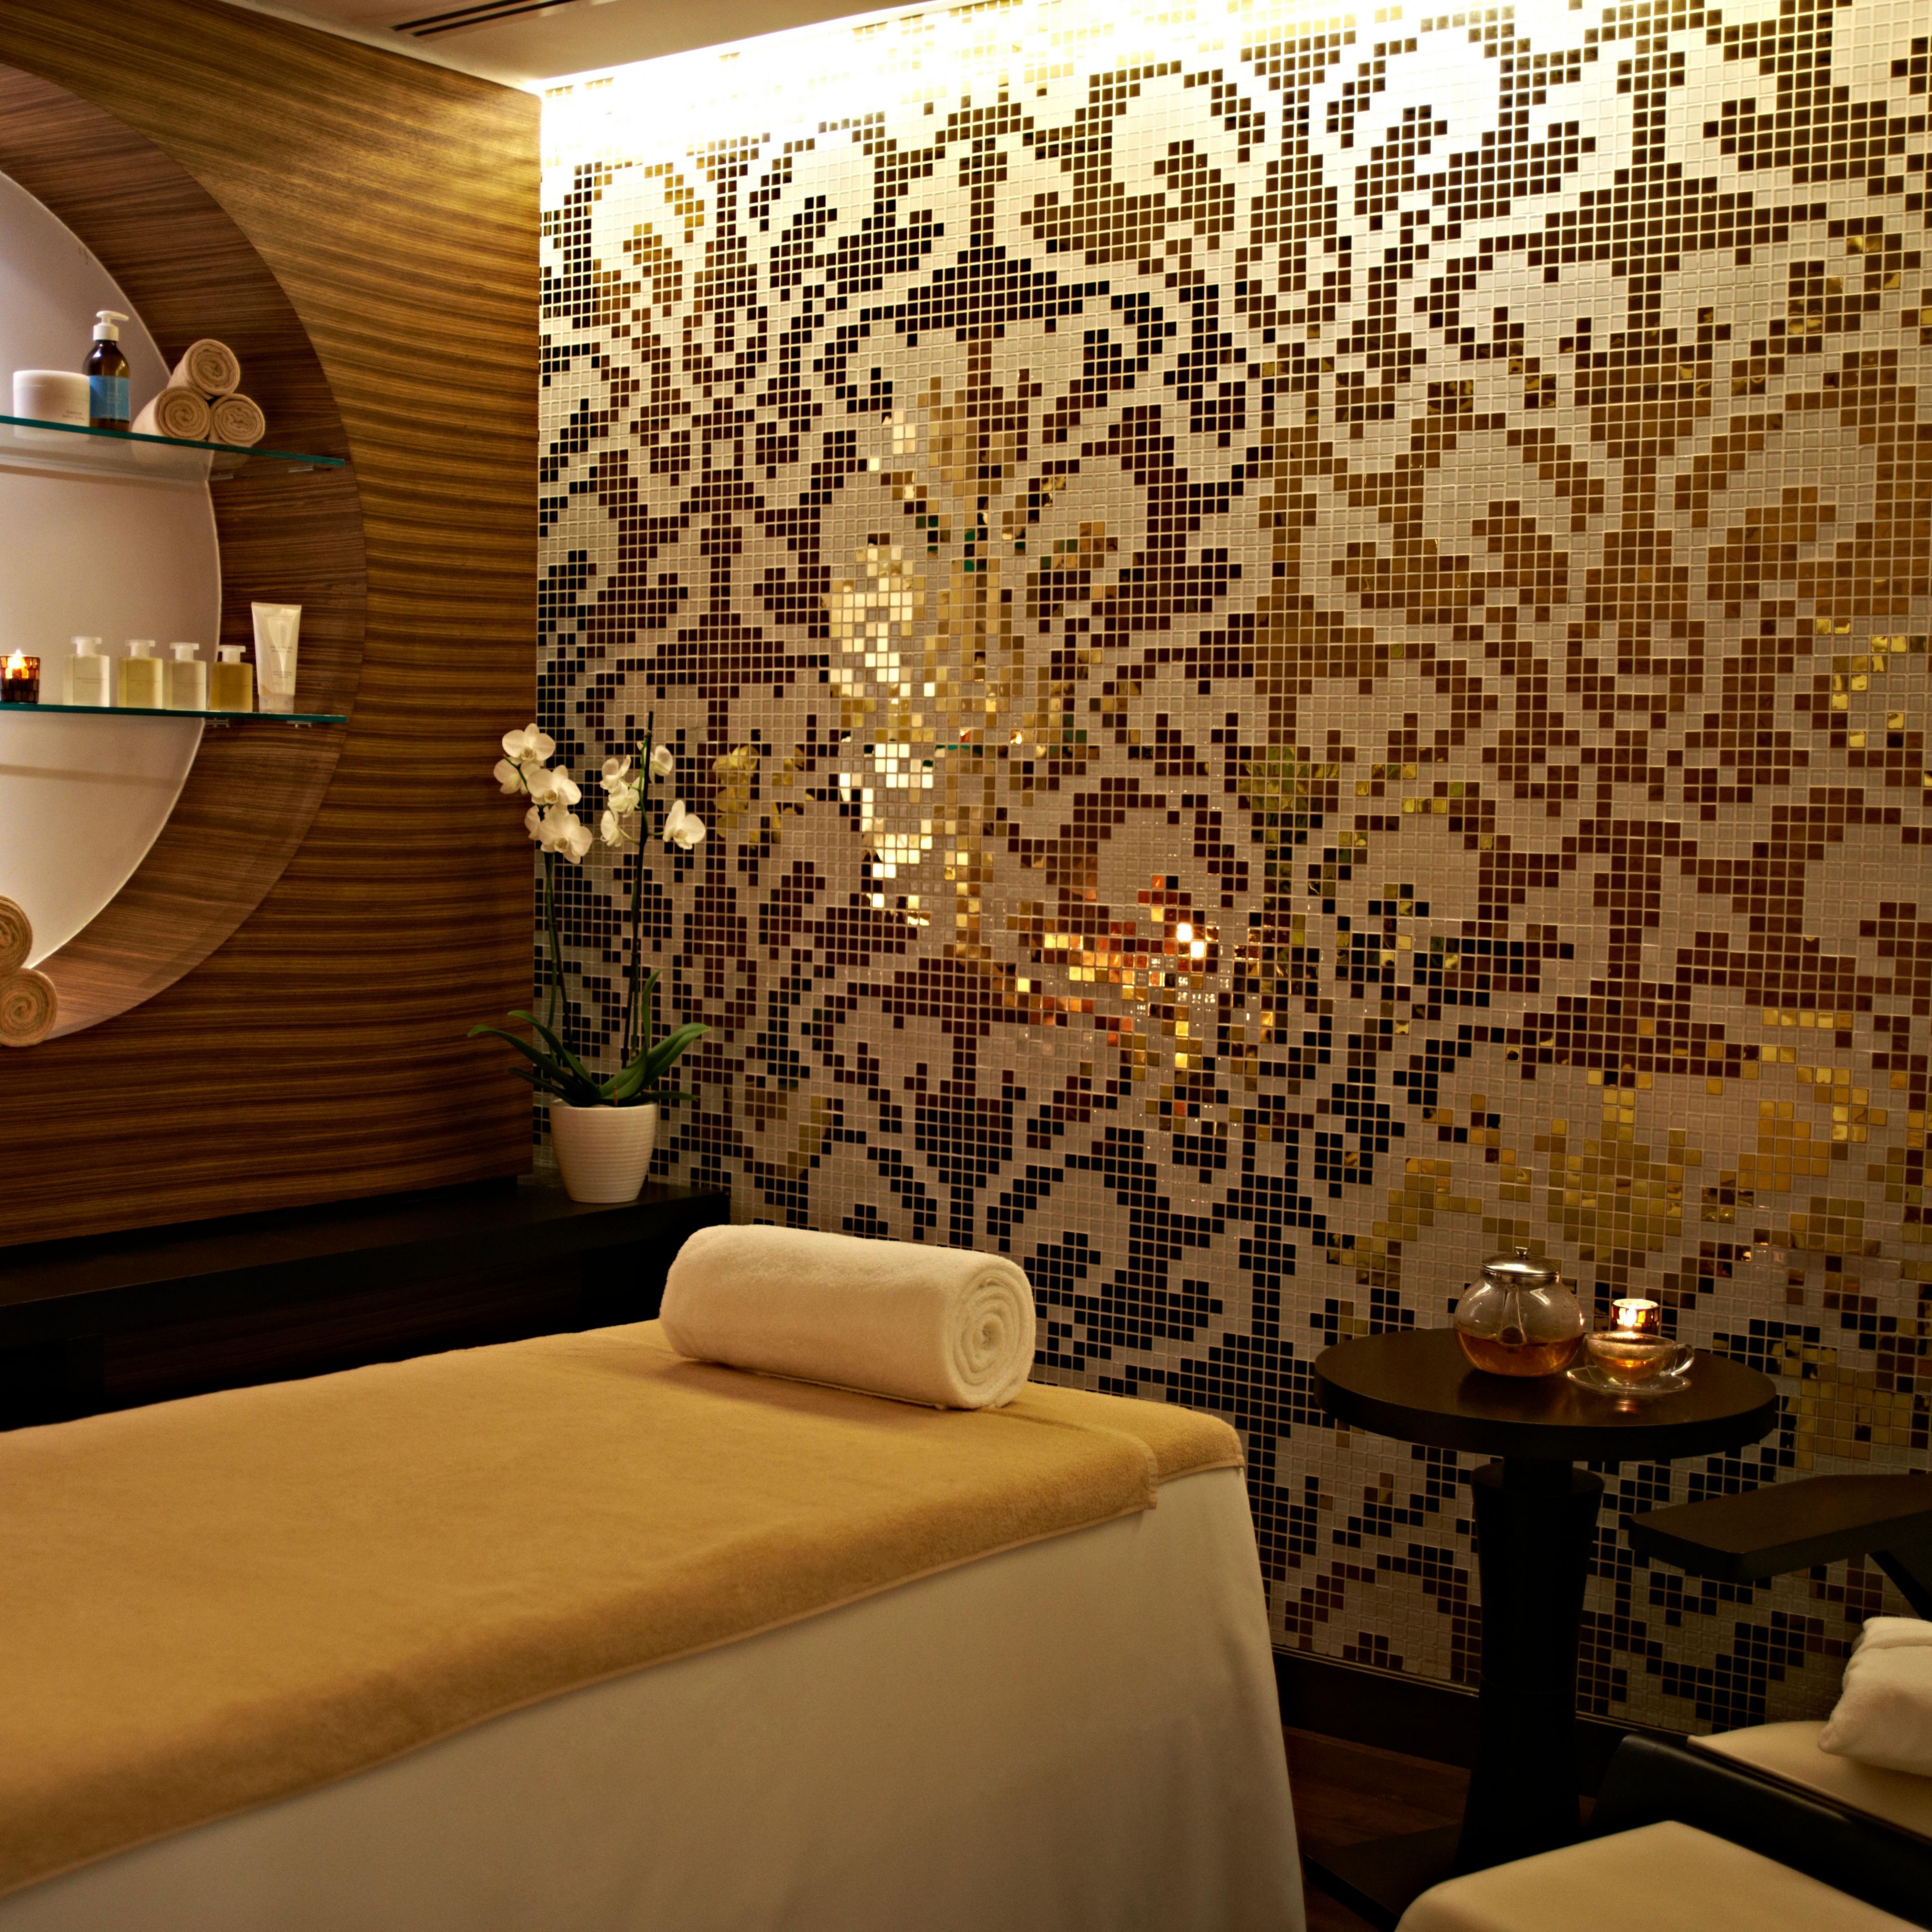 The Spa, signature therapies including full body massages